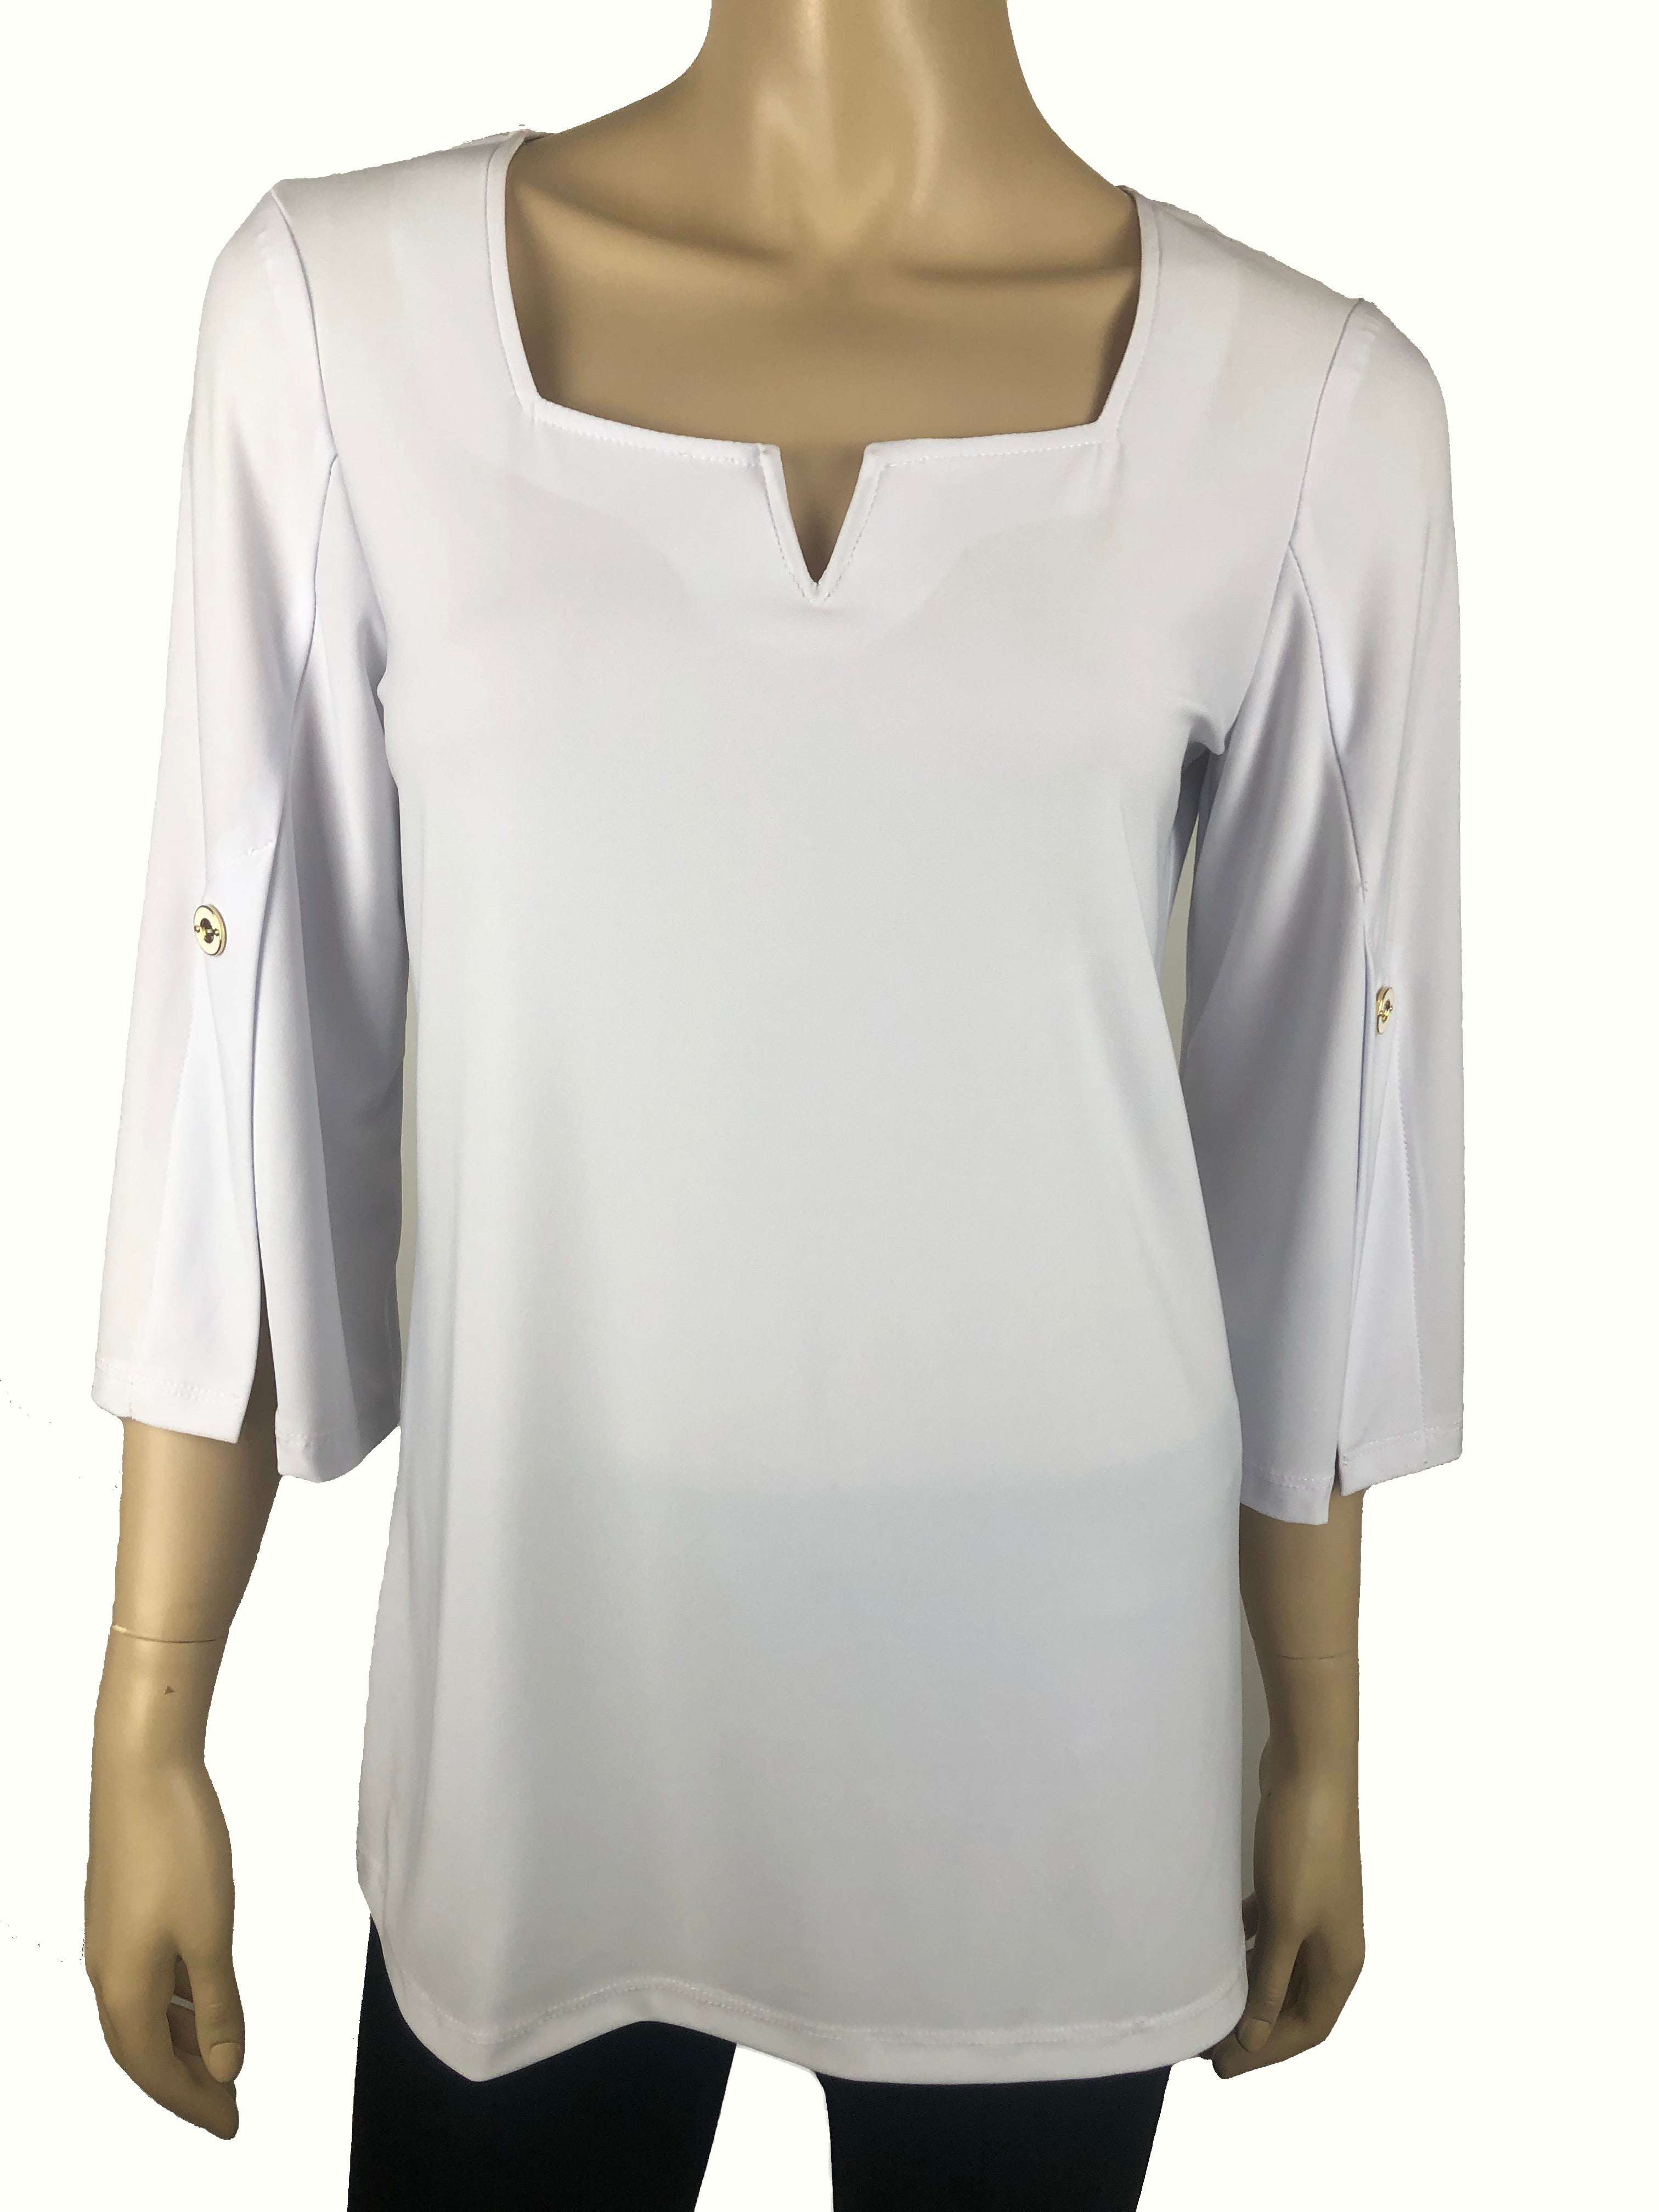 Women's White Top Elegant Neckline Flowing Sleeves Quality Stretch Fabric Made in Canada - Yvonne Marie - Yvonne Marie